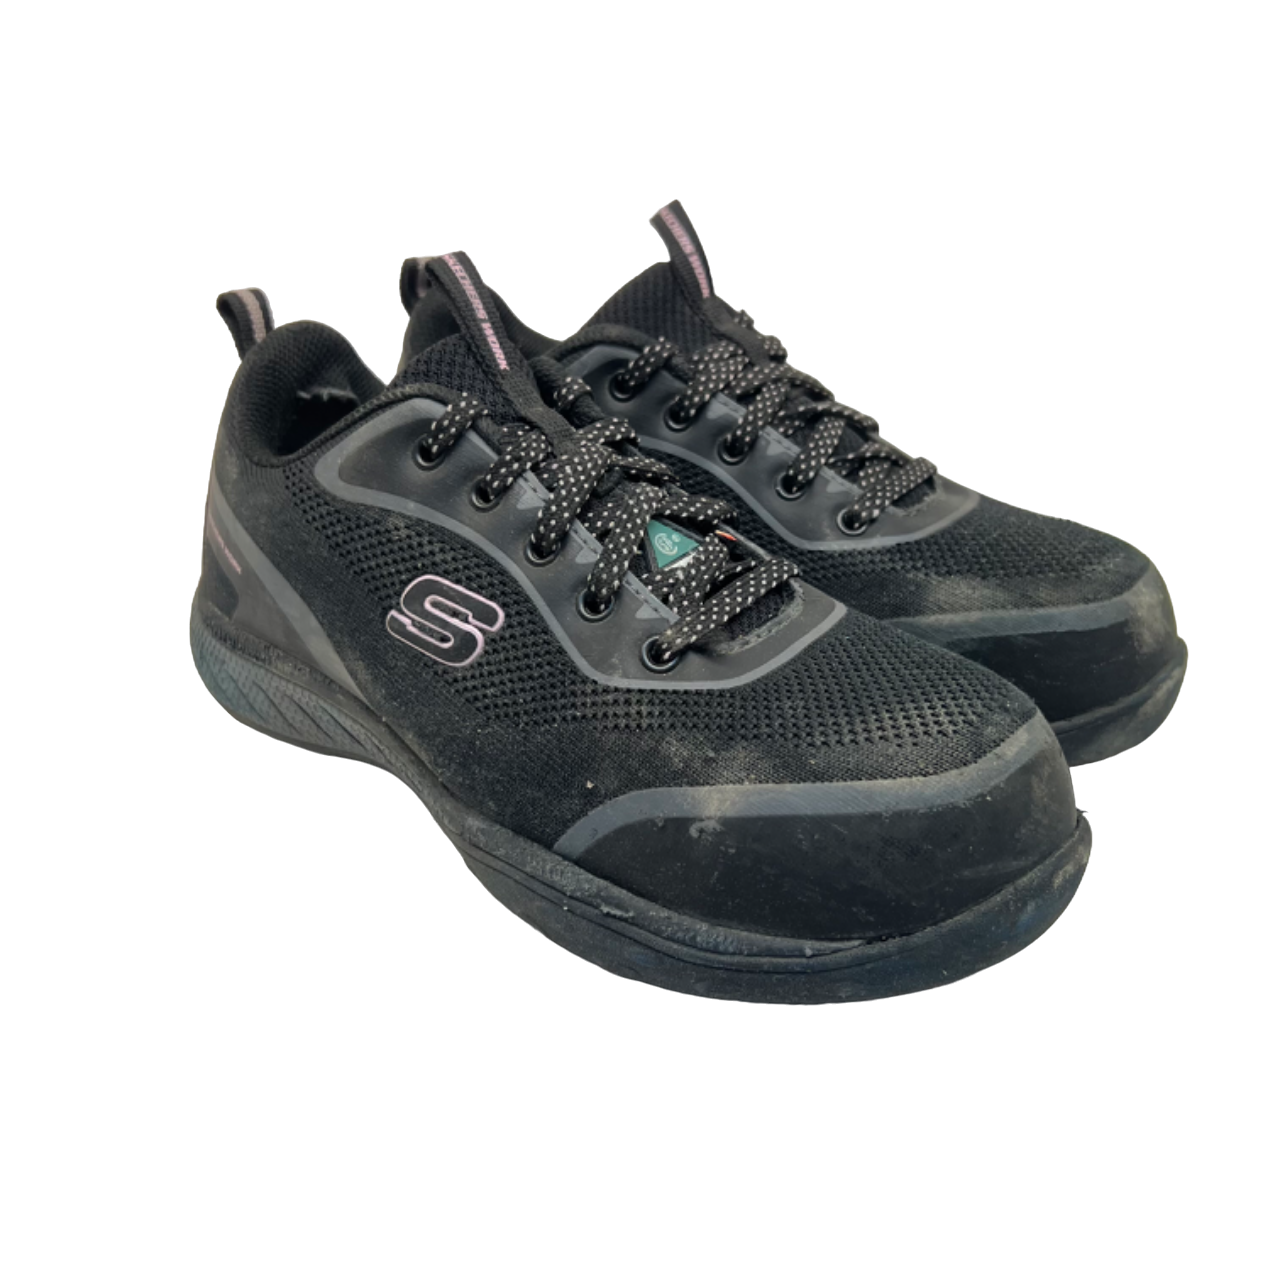 Primary image for Skechers Women's Steel Toe Steel Plate 99996550 Athletic Safety Shoes Black 7.5M